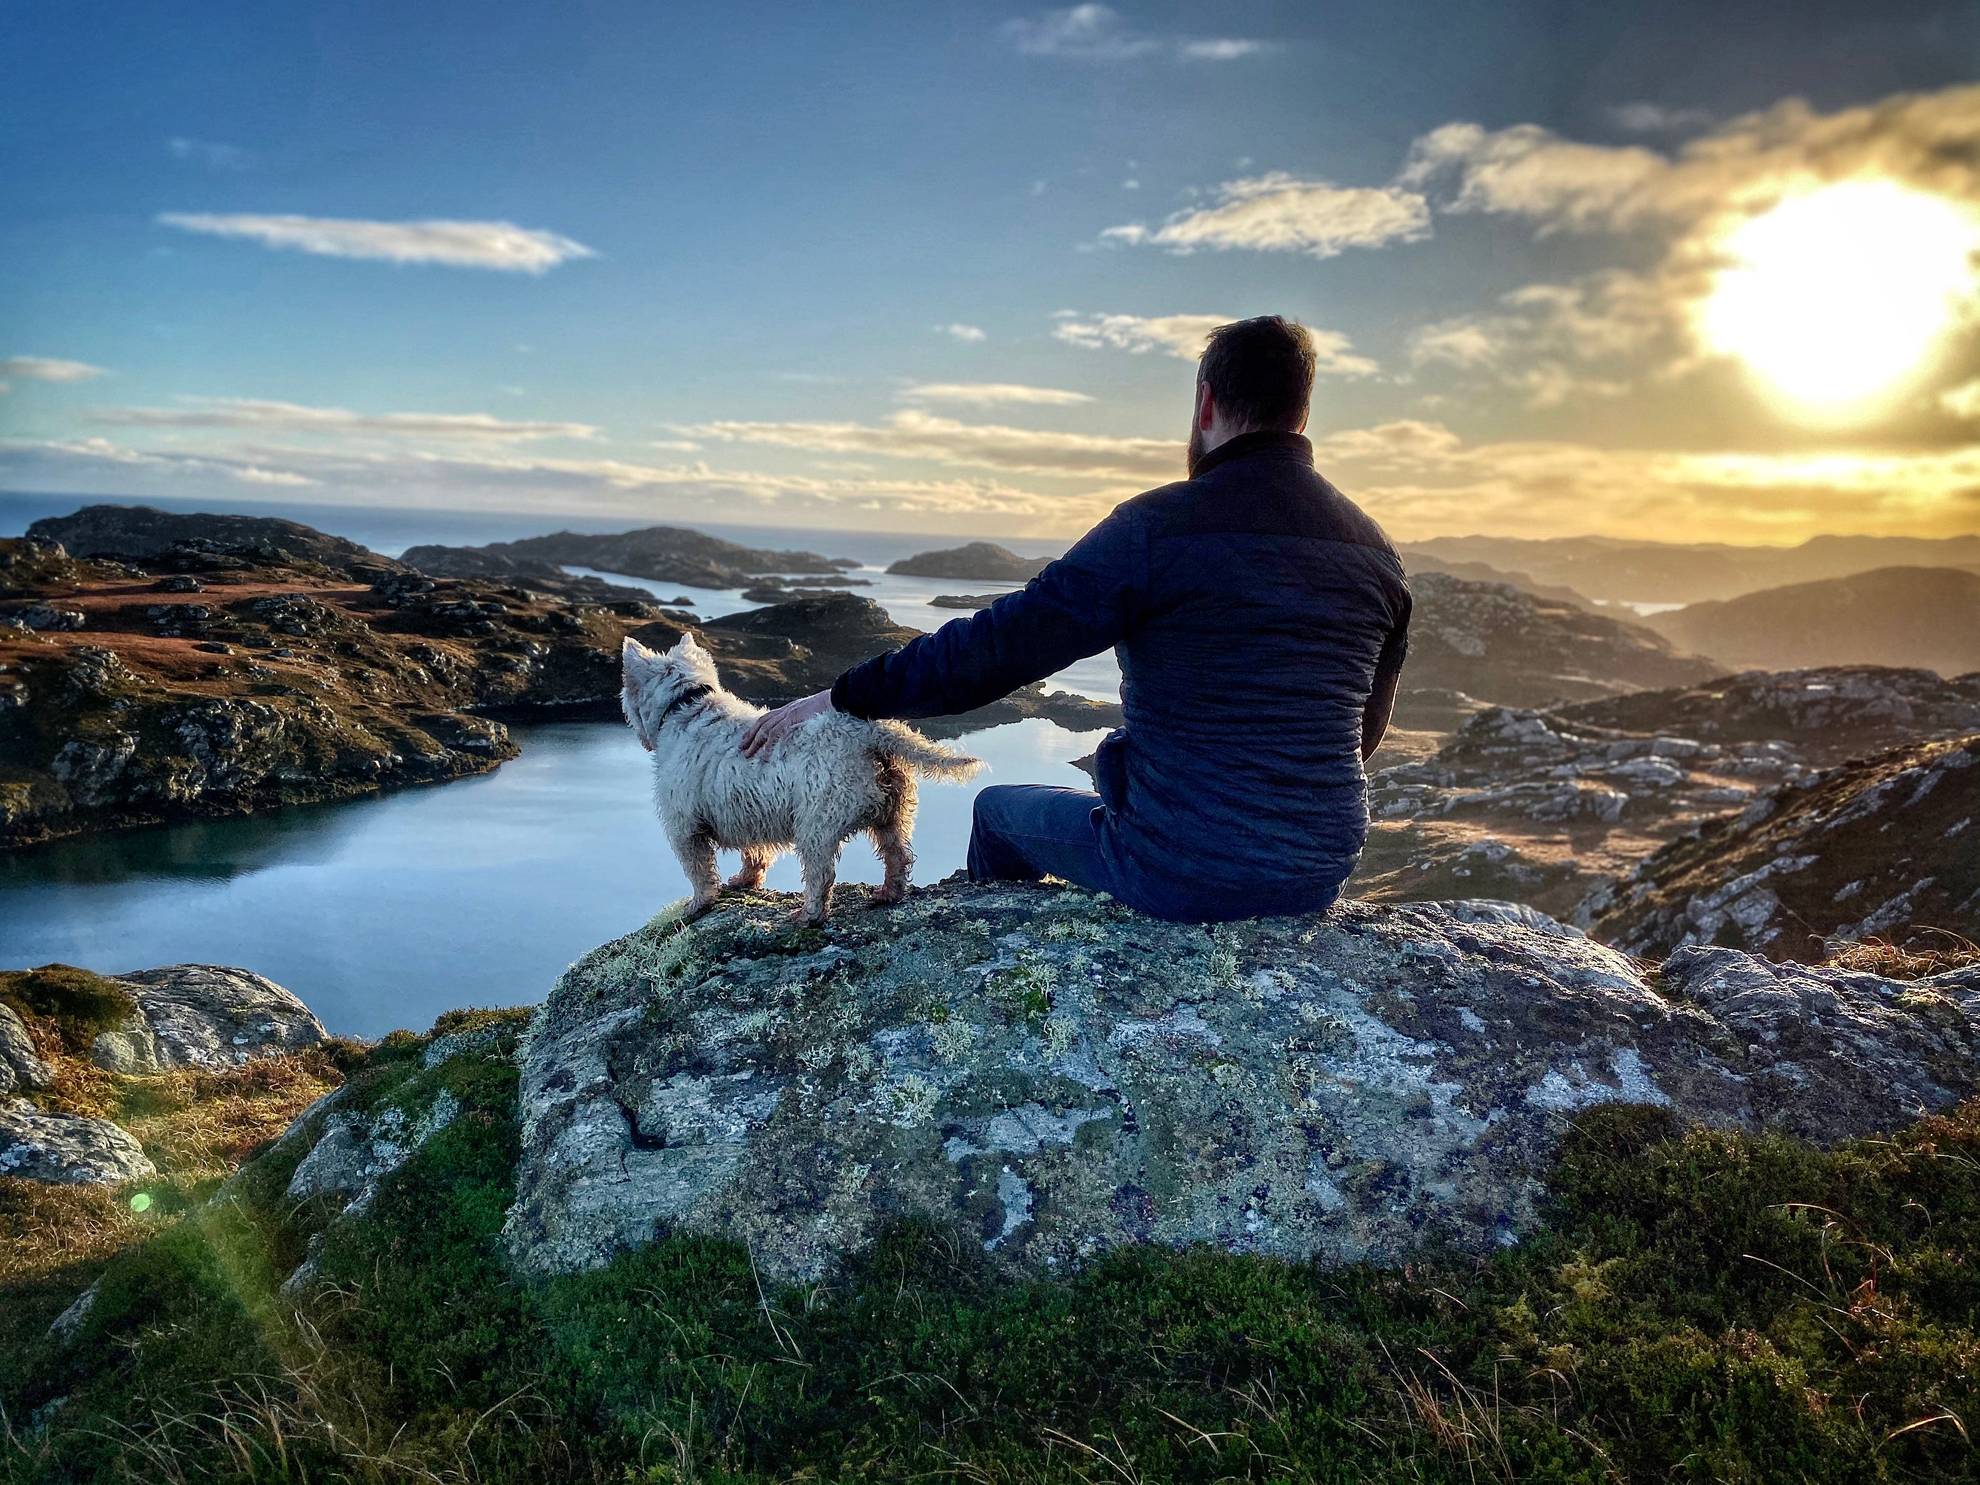 A man with his back to the camera sat on a rock in the Outer Hedrides, while petting his dog